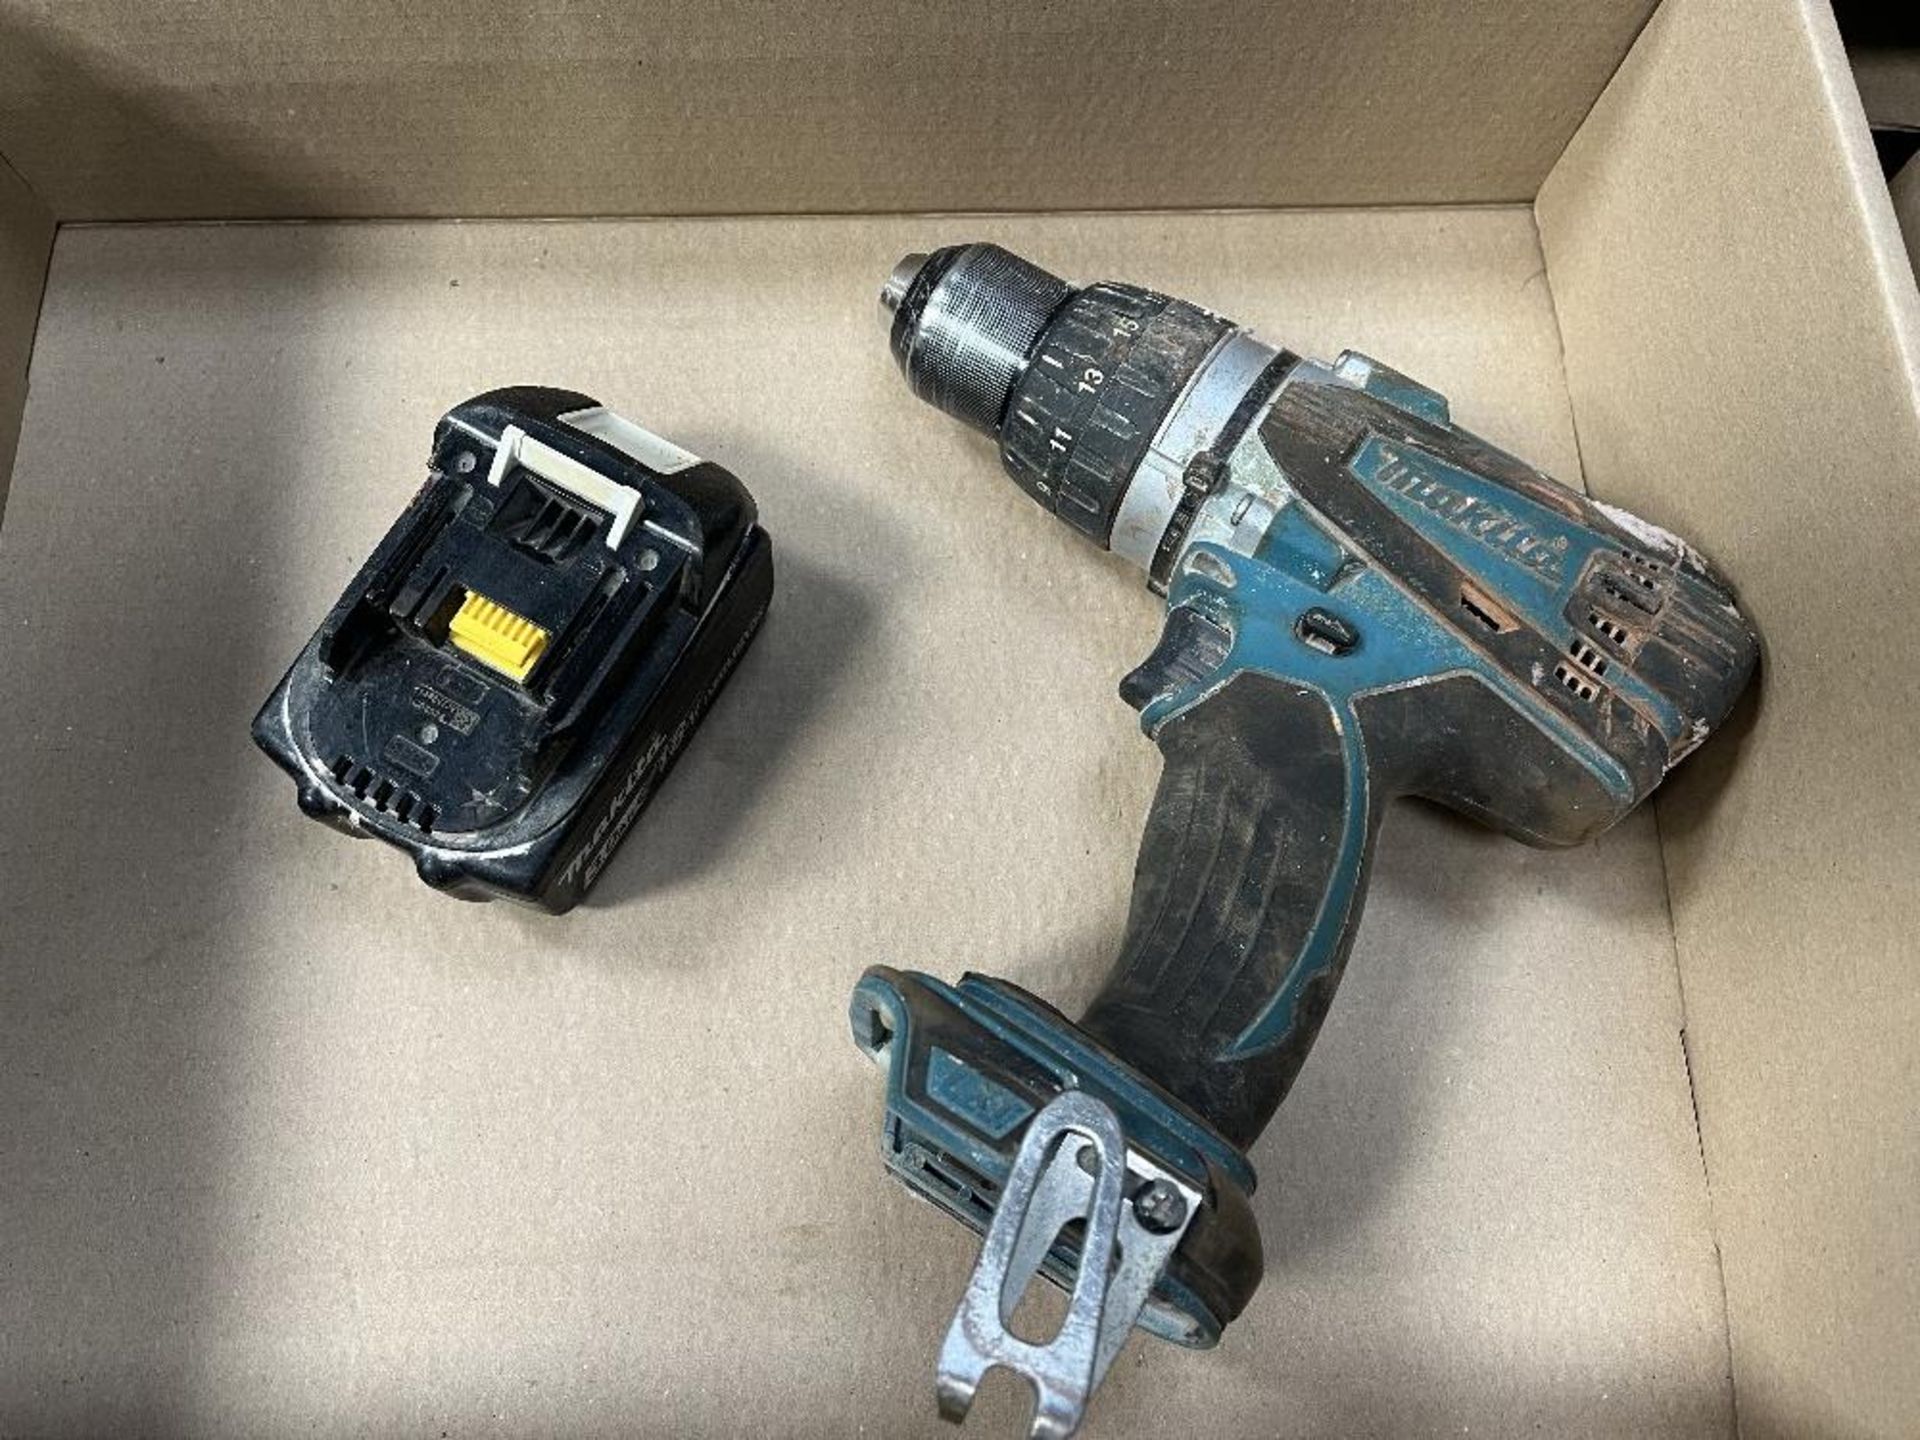 Makita DHP458 Combi drill with (1) battery - no charger included - Image 2 of 2